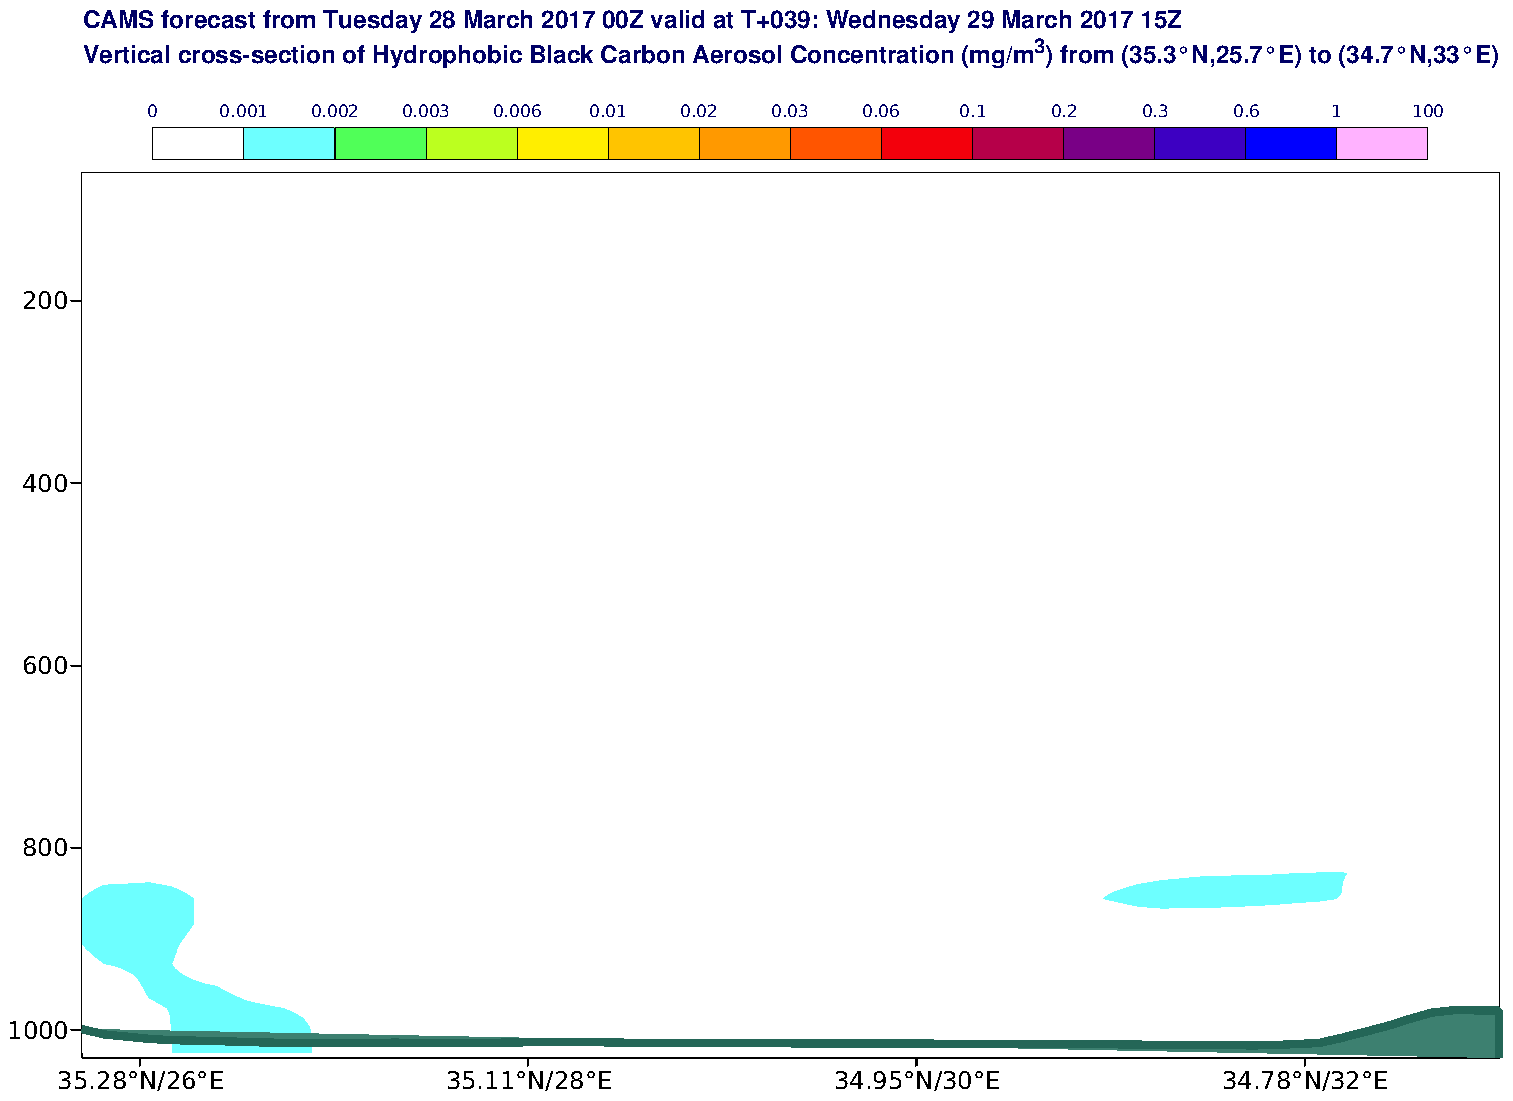 Vertical cross-section of Hydrophobic Black Carbon Aerosol Concentration (mg/m3) valid at T39 - 2017-03-29 15:00